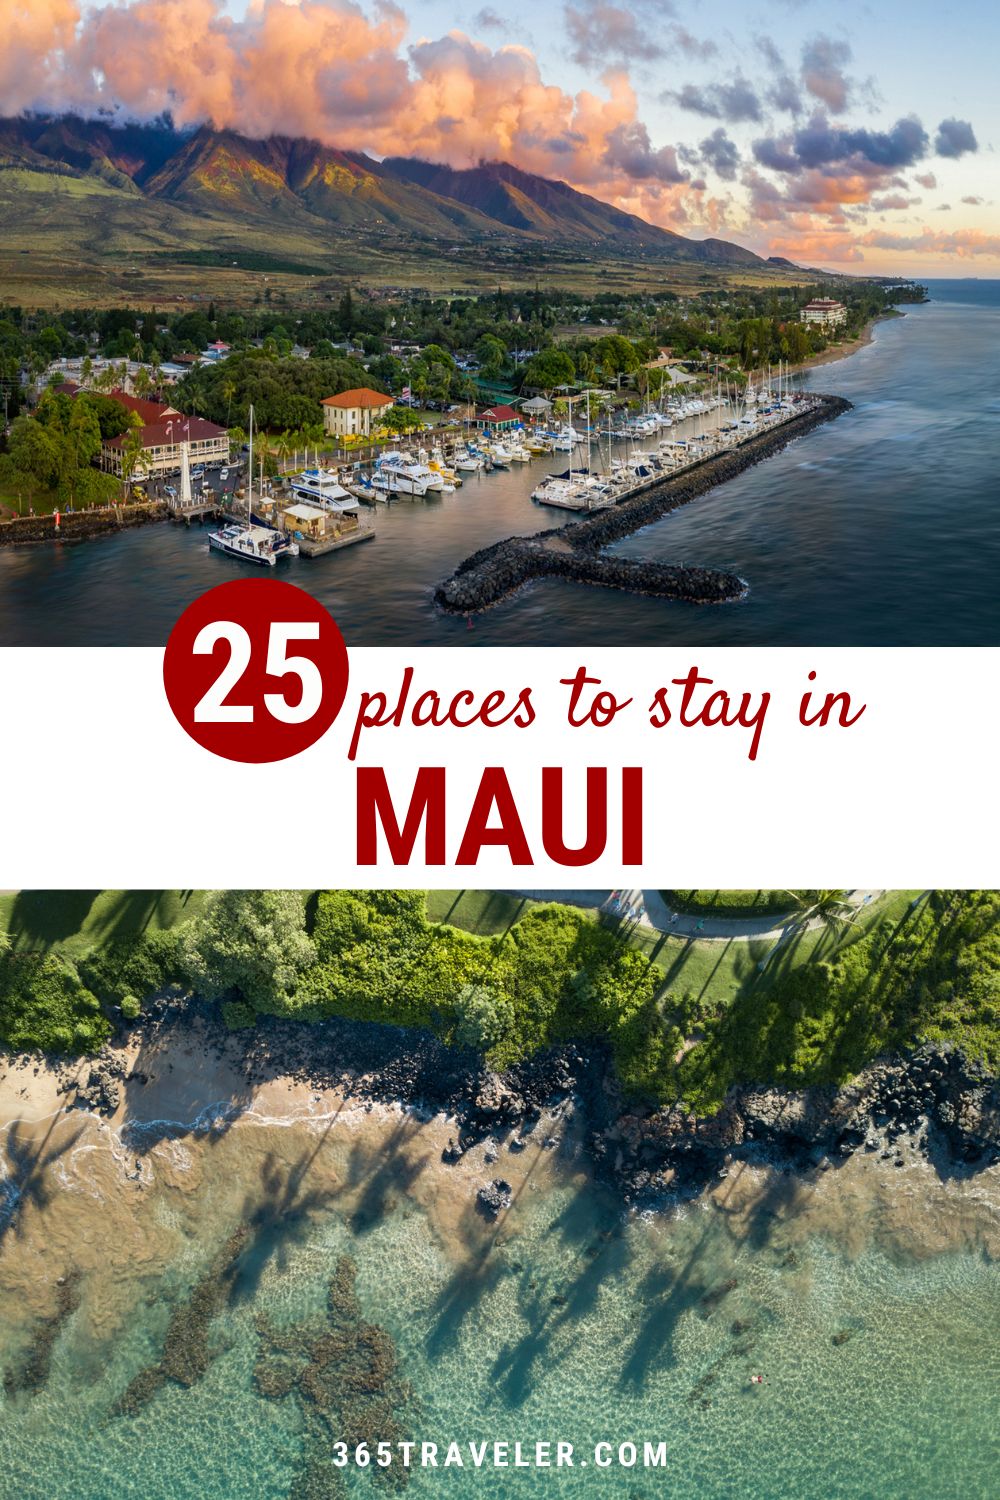 Wondering Where To Stay in Maui? 25 Great Spots You’ll Love